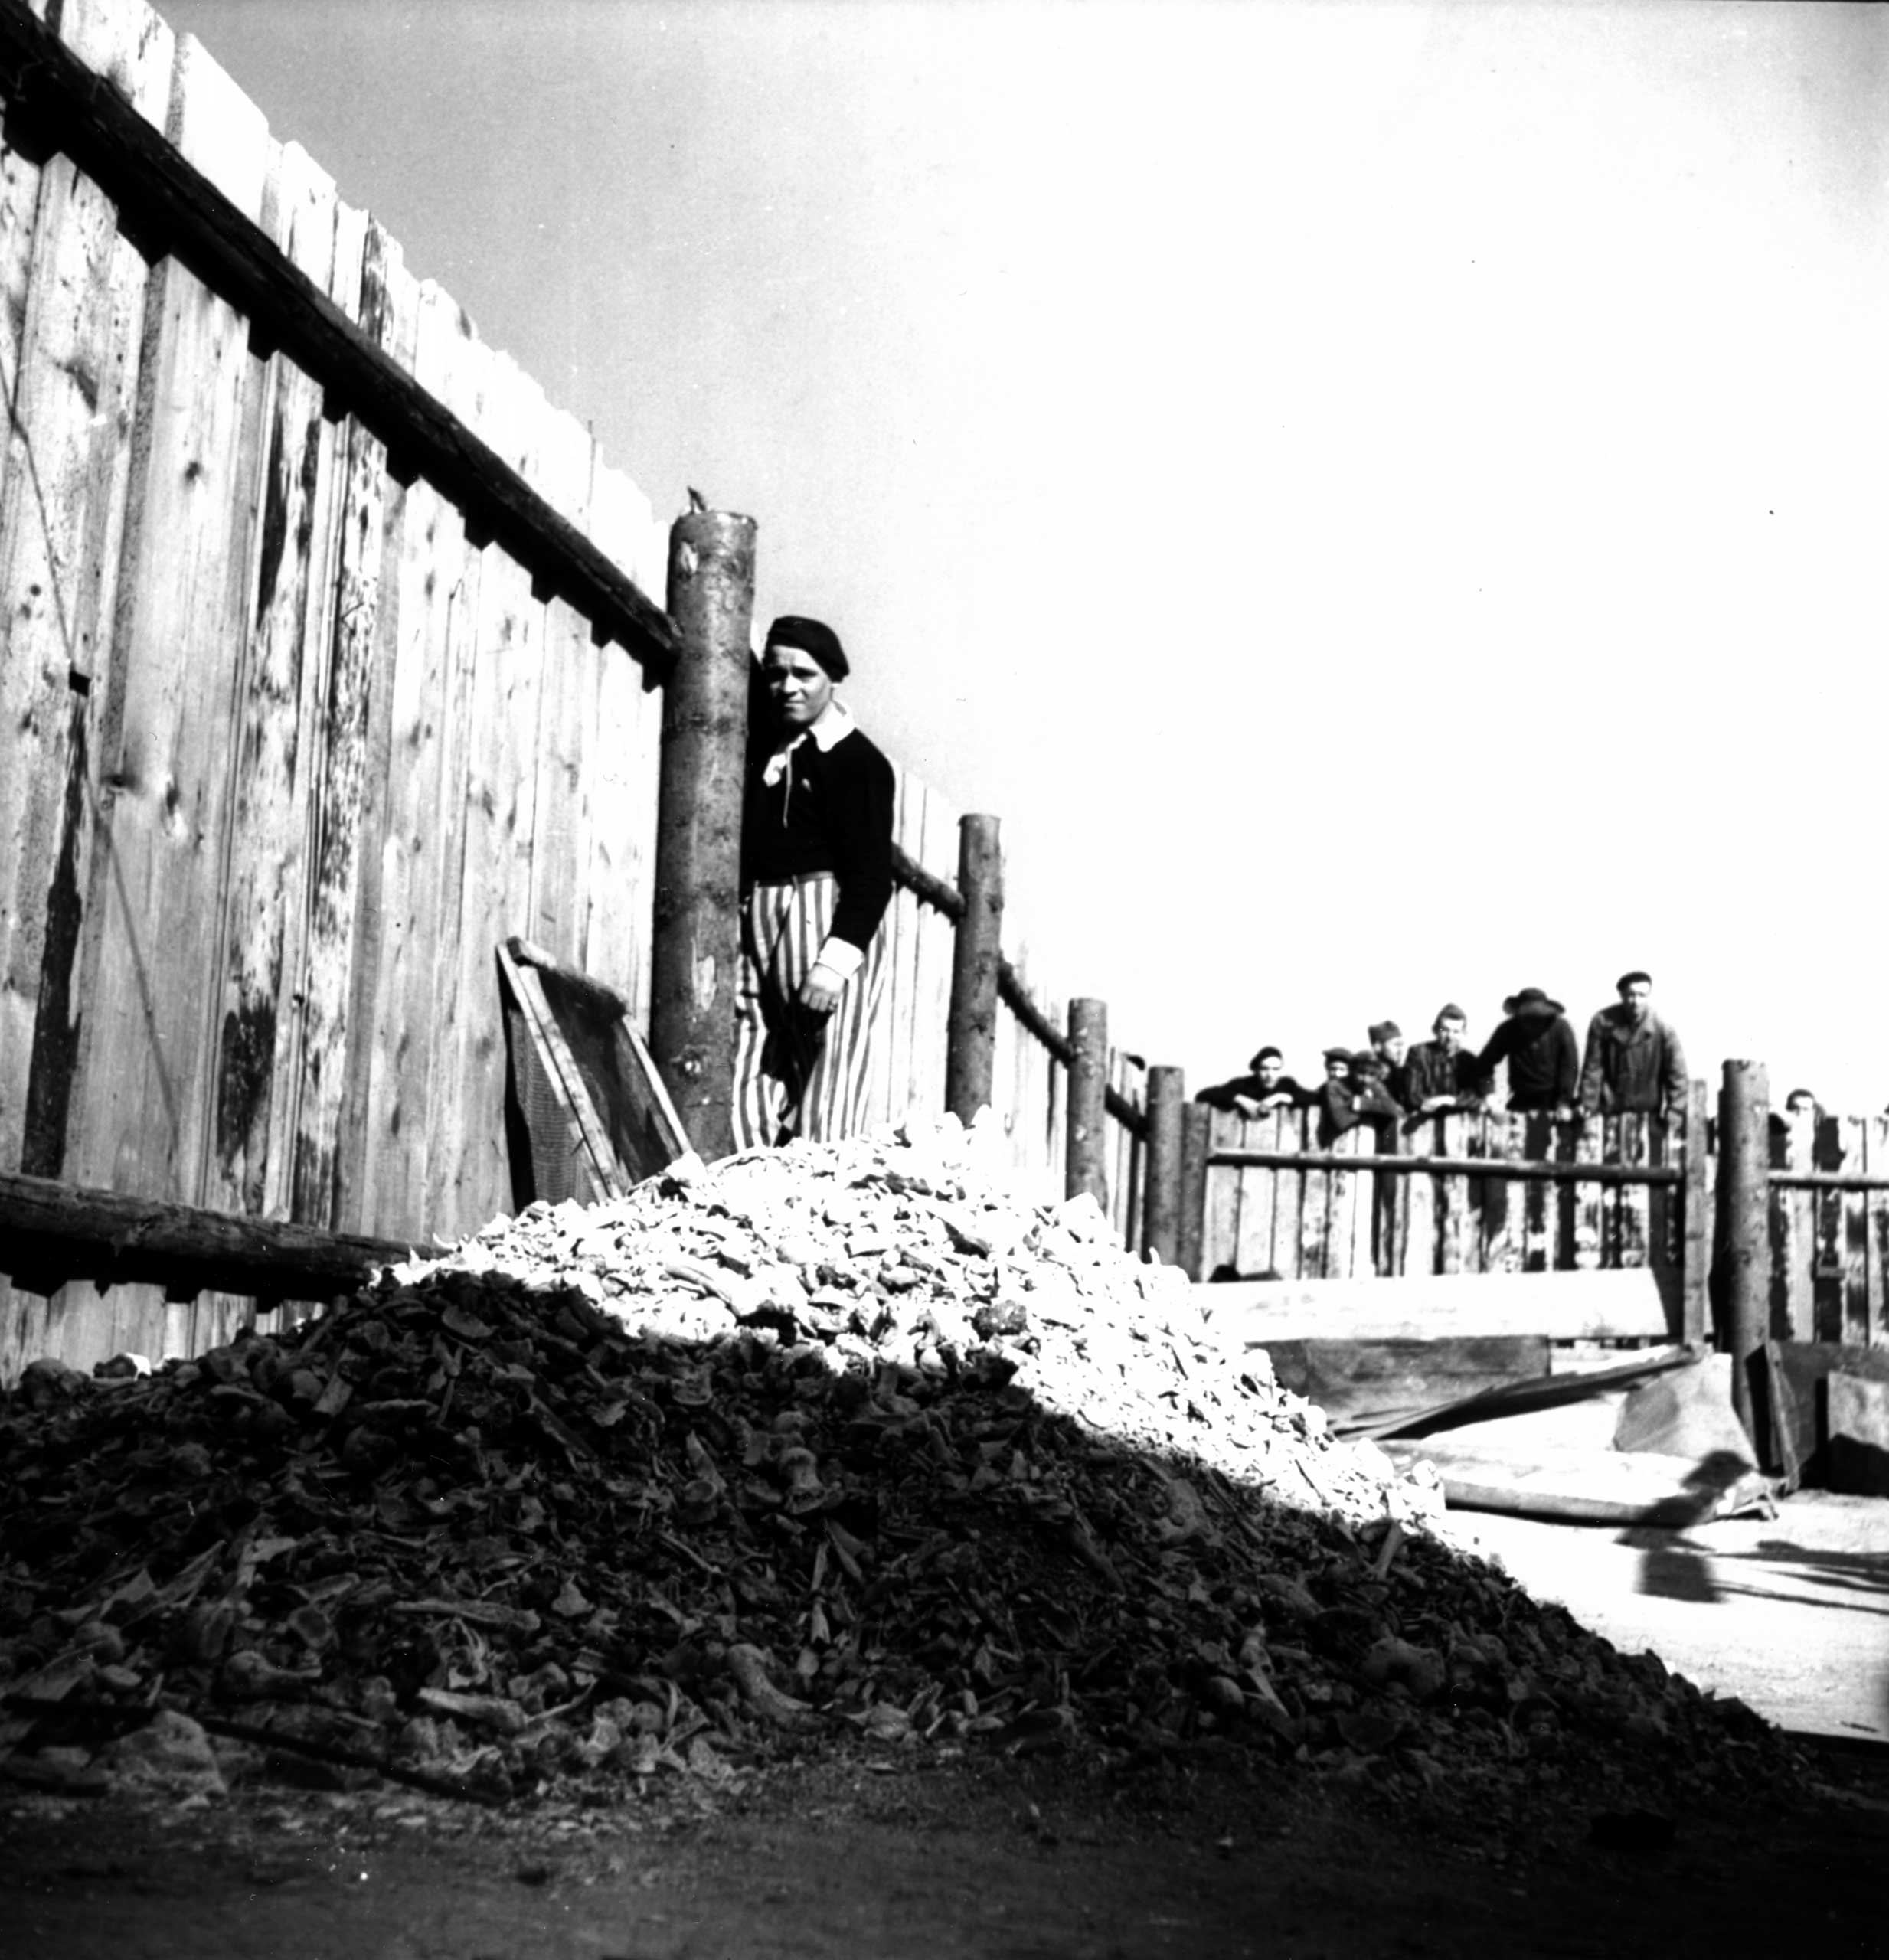 Not published in LIFE. A newly liberated prisoner stands beside a pile of human ashes and bones, Buchenwald, April 1945.